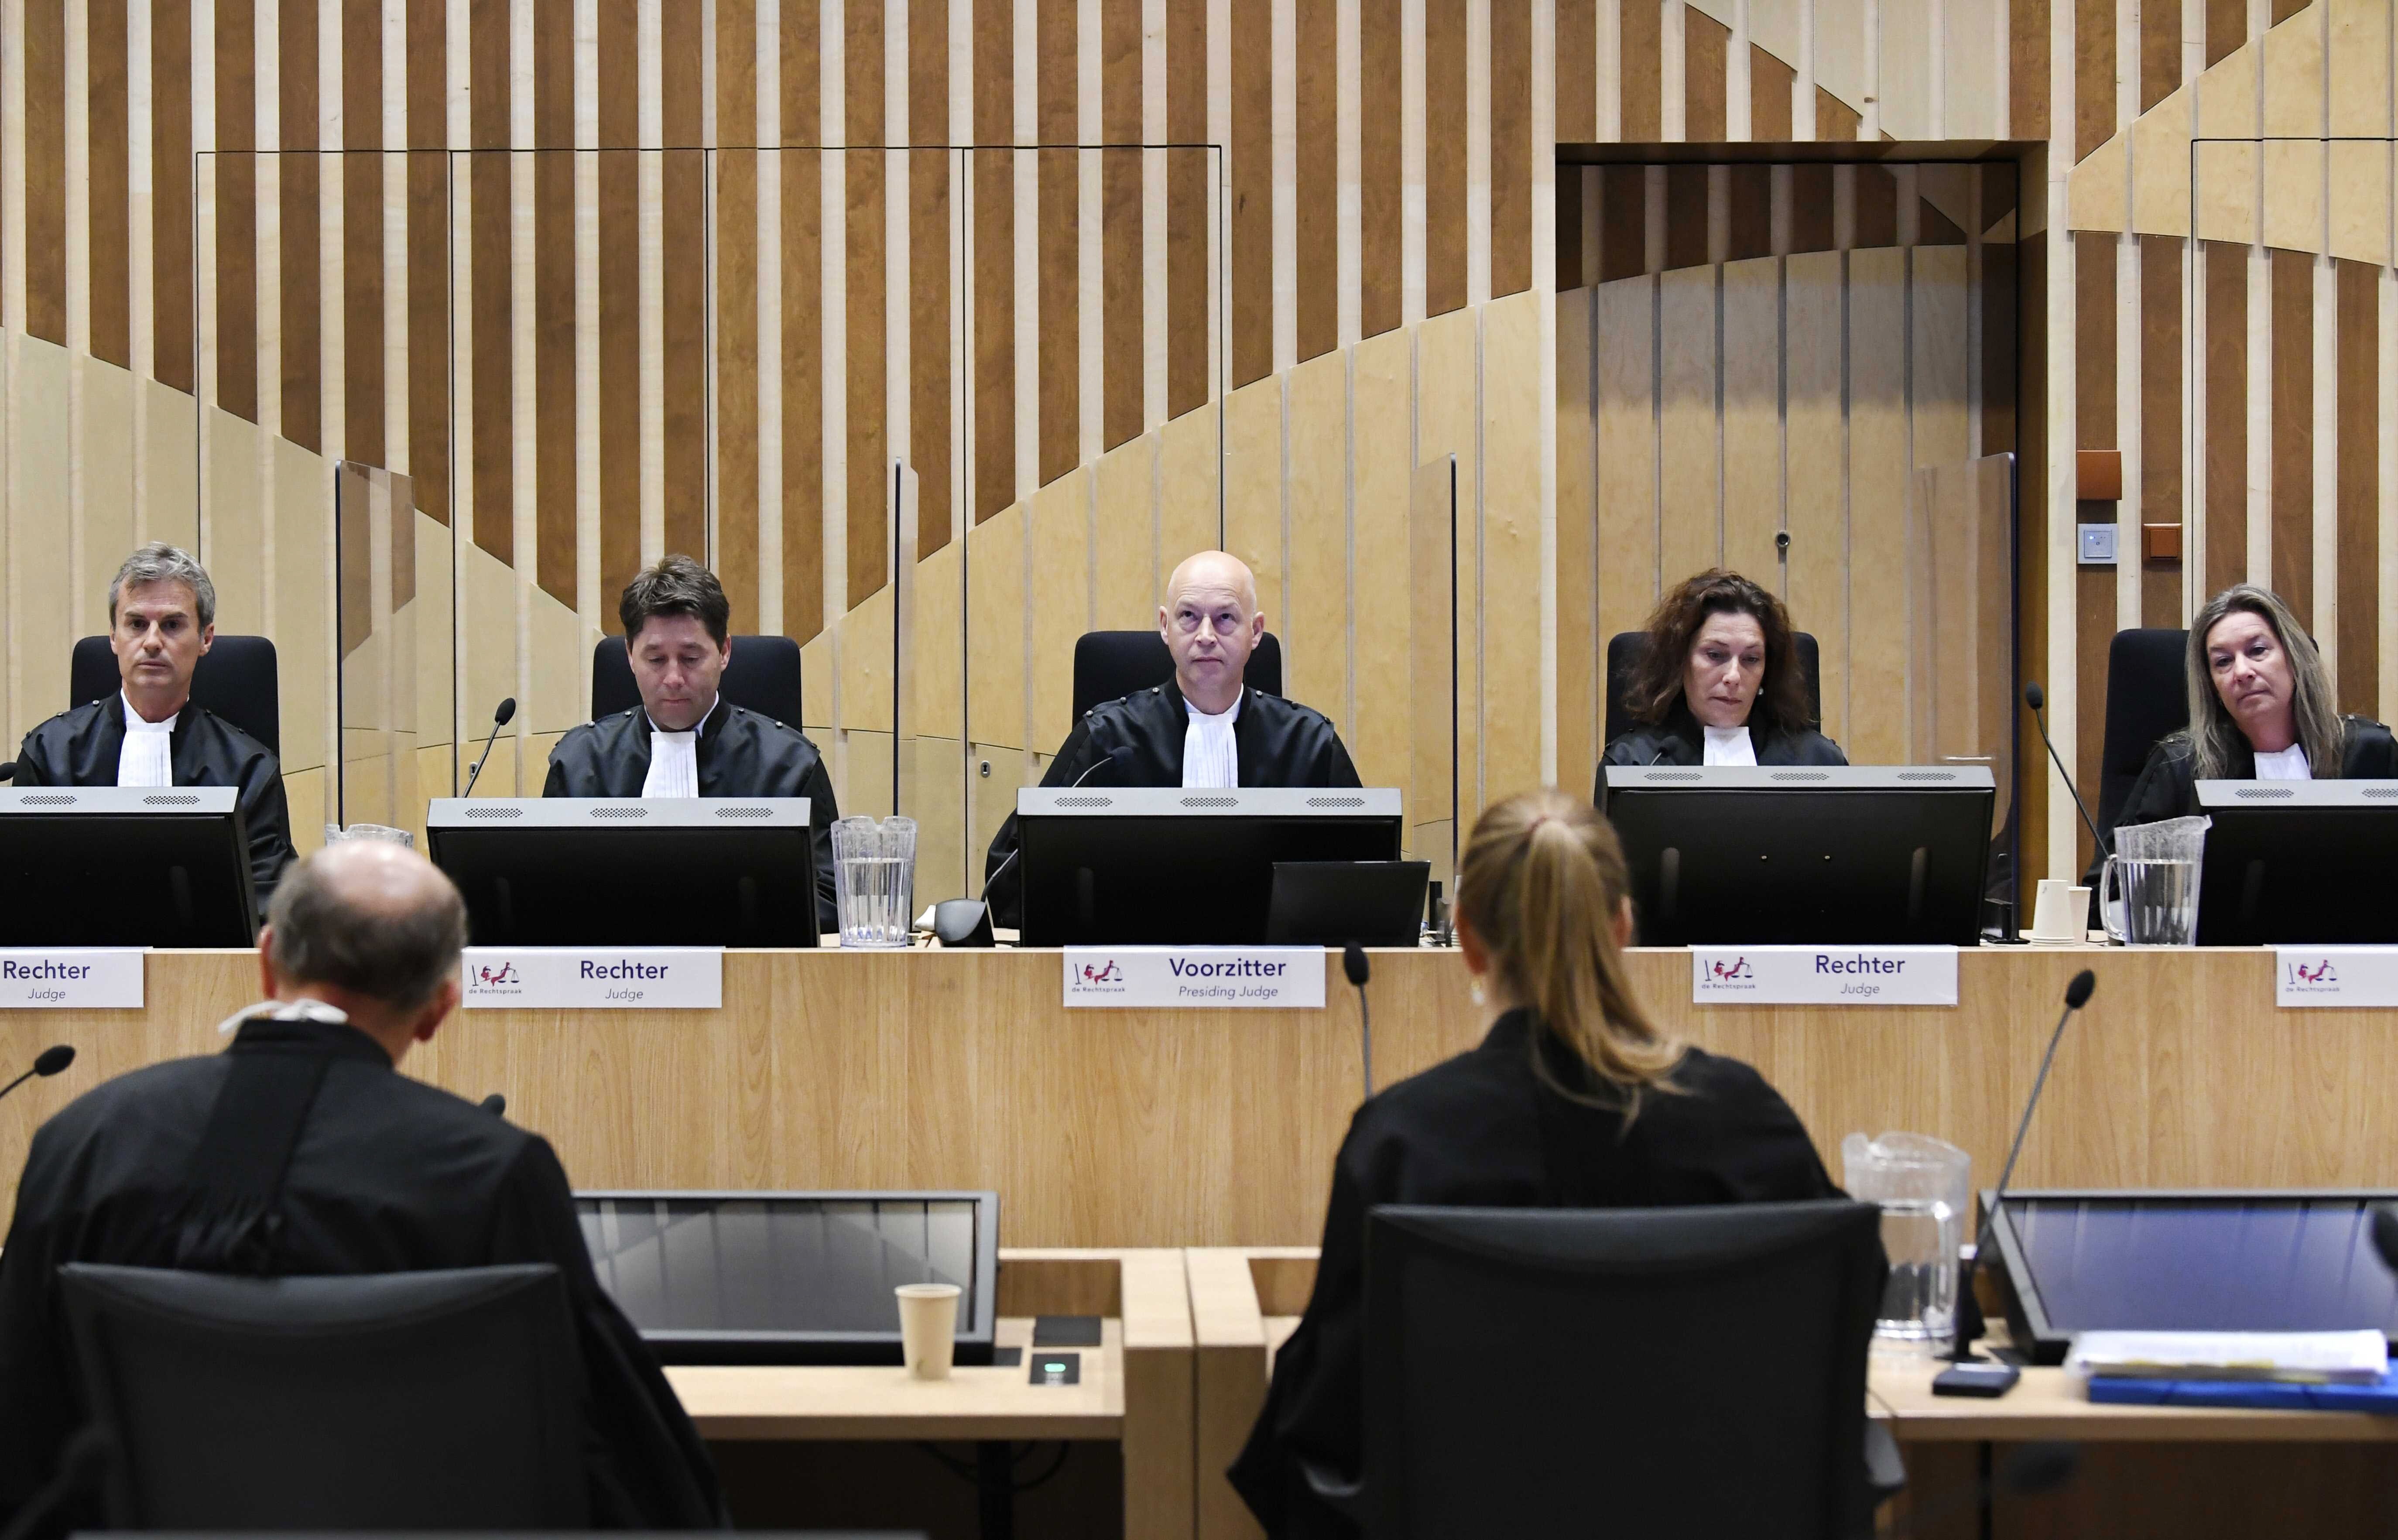 Judge Hendrik Steenhuis (centre) attends the hearing in the trial of suspects charged with shooting down Malaysia Airlines Flight 17, in the high-security courtroom of the Schiphol Judicial Complex in The Netherlands. Photo: EPA-EFE